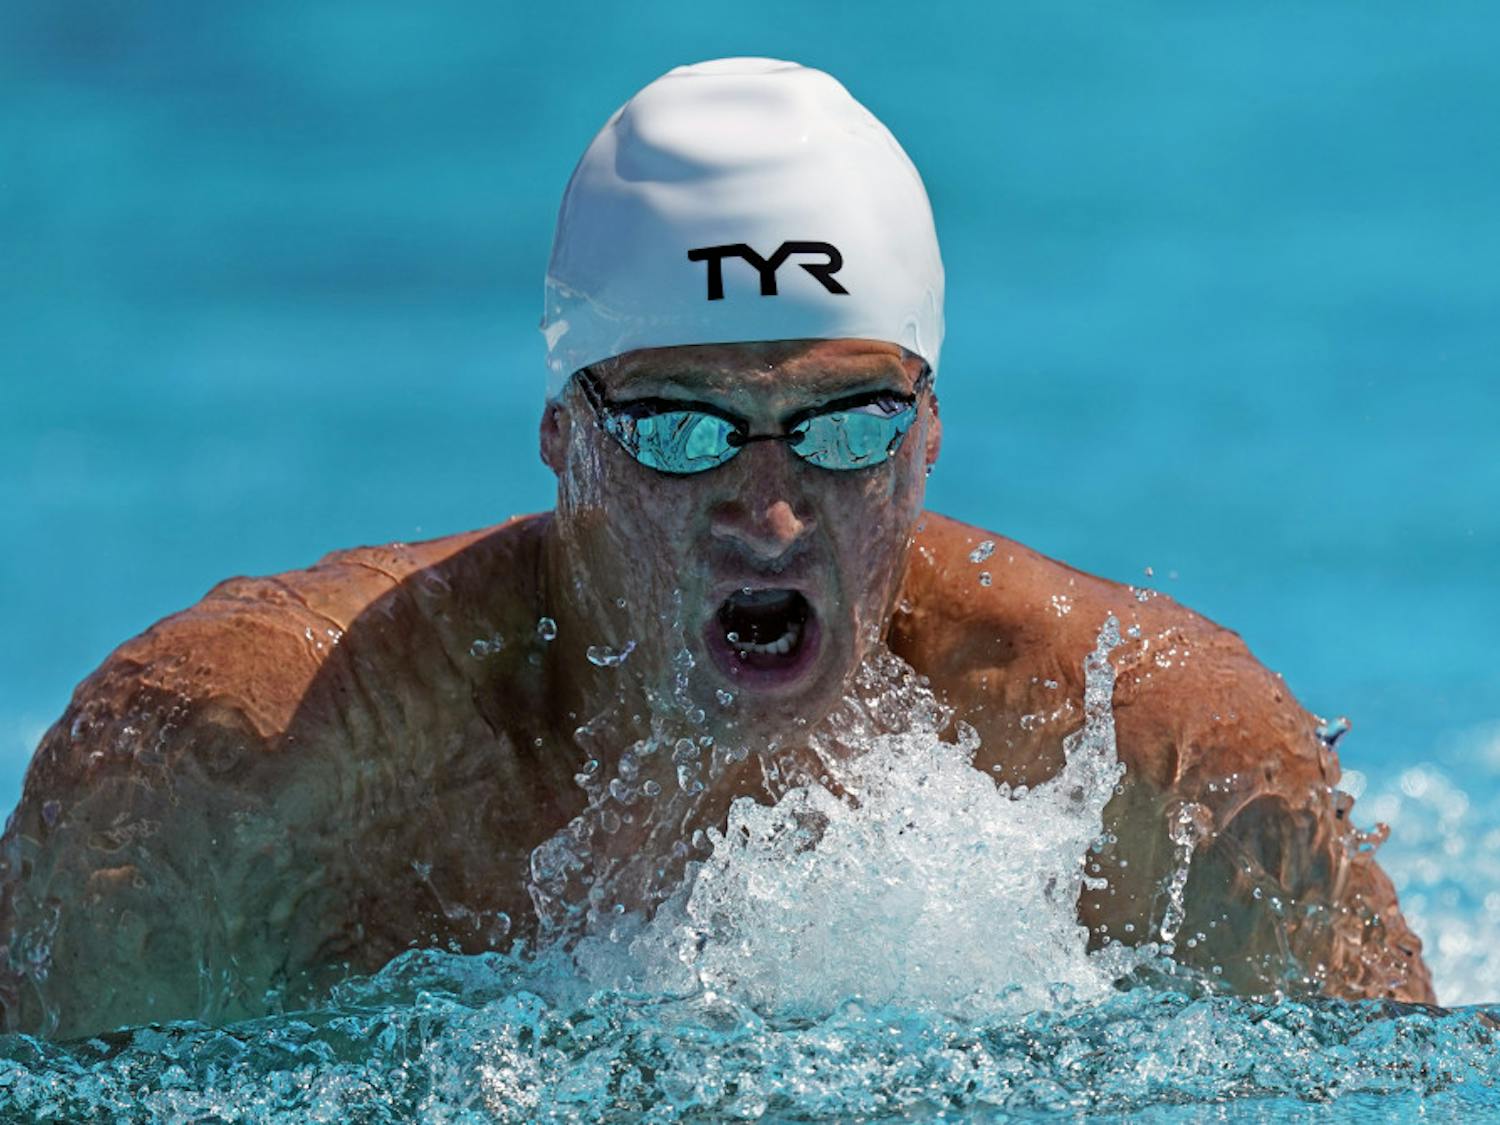 Ryan Lochte competes in the Men’s 200-meter individual medley time trial at the U.S national swimming championships in Stanford, California, Wednesday, July 31, 2019.